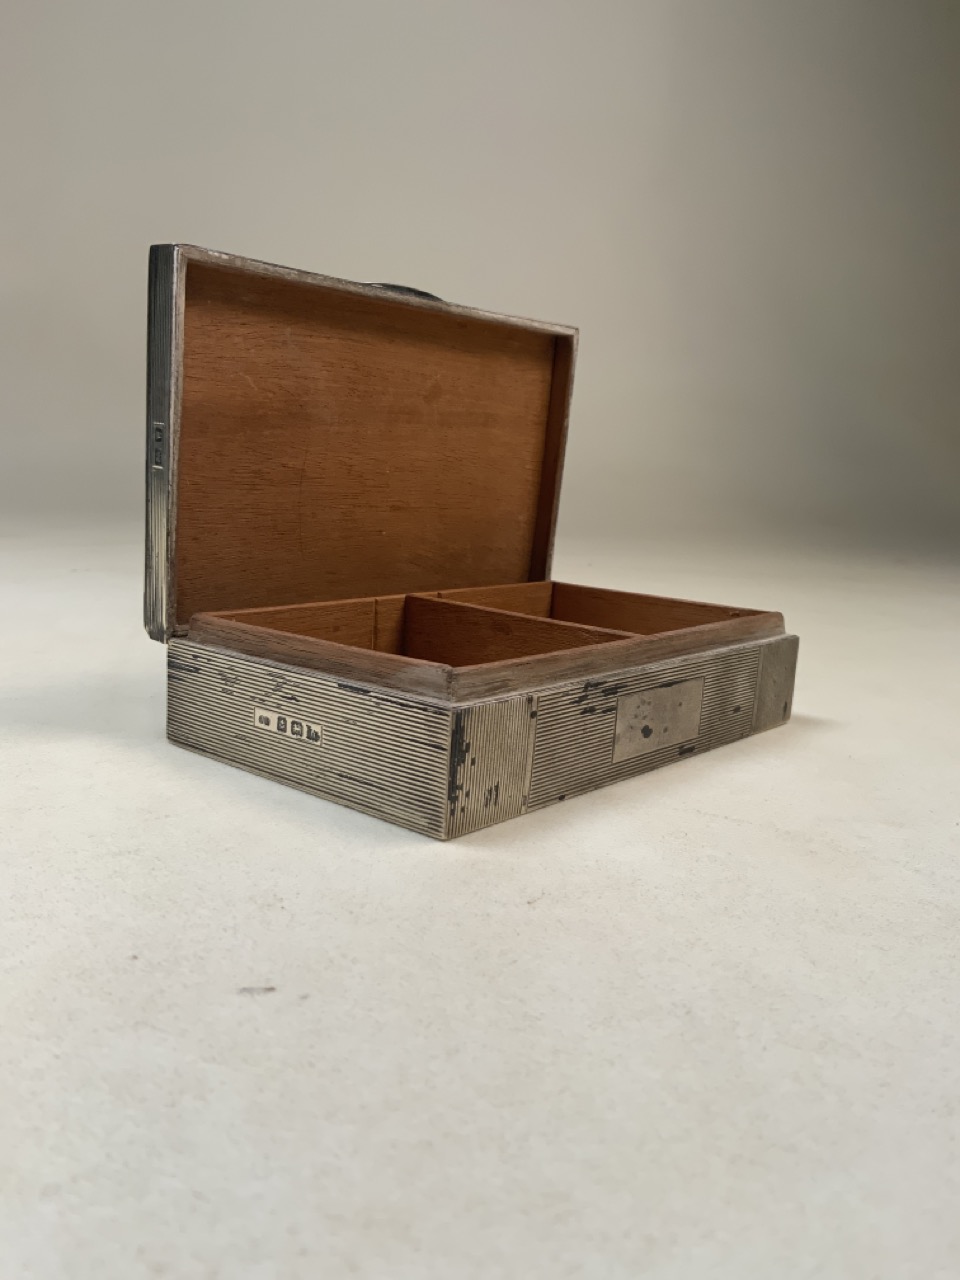 A sterling silver cedar lined cigarette box with engine turned decoration by John Rose Birmingham